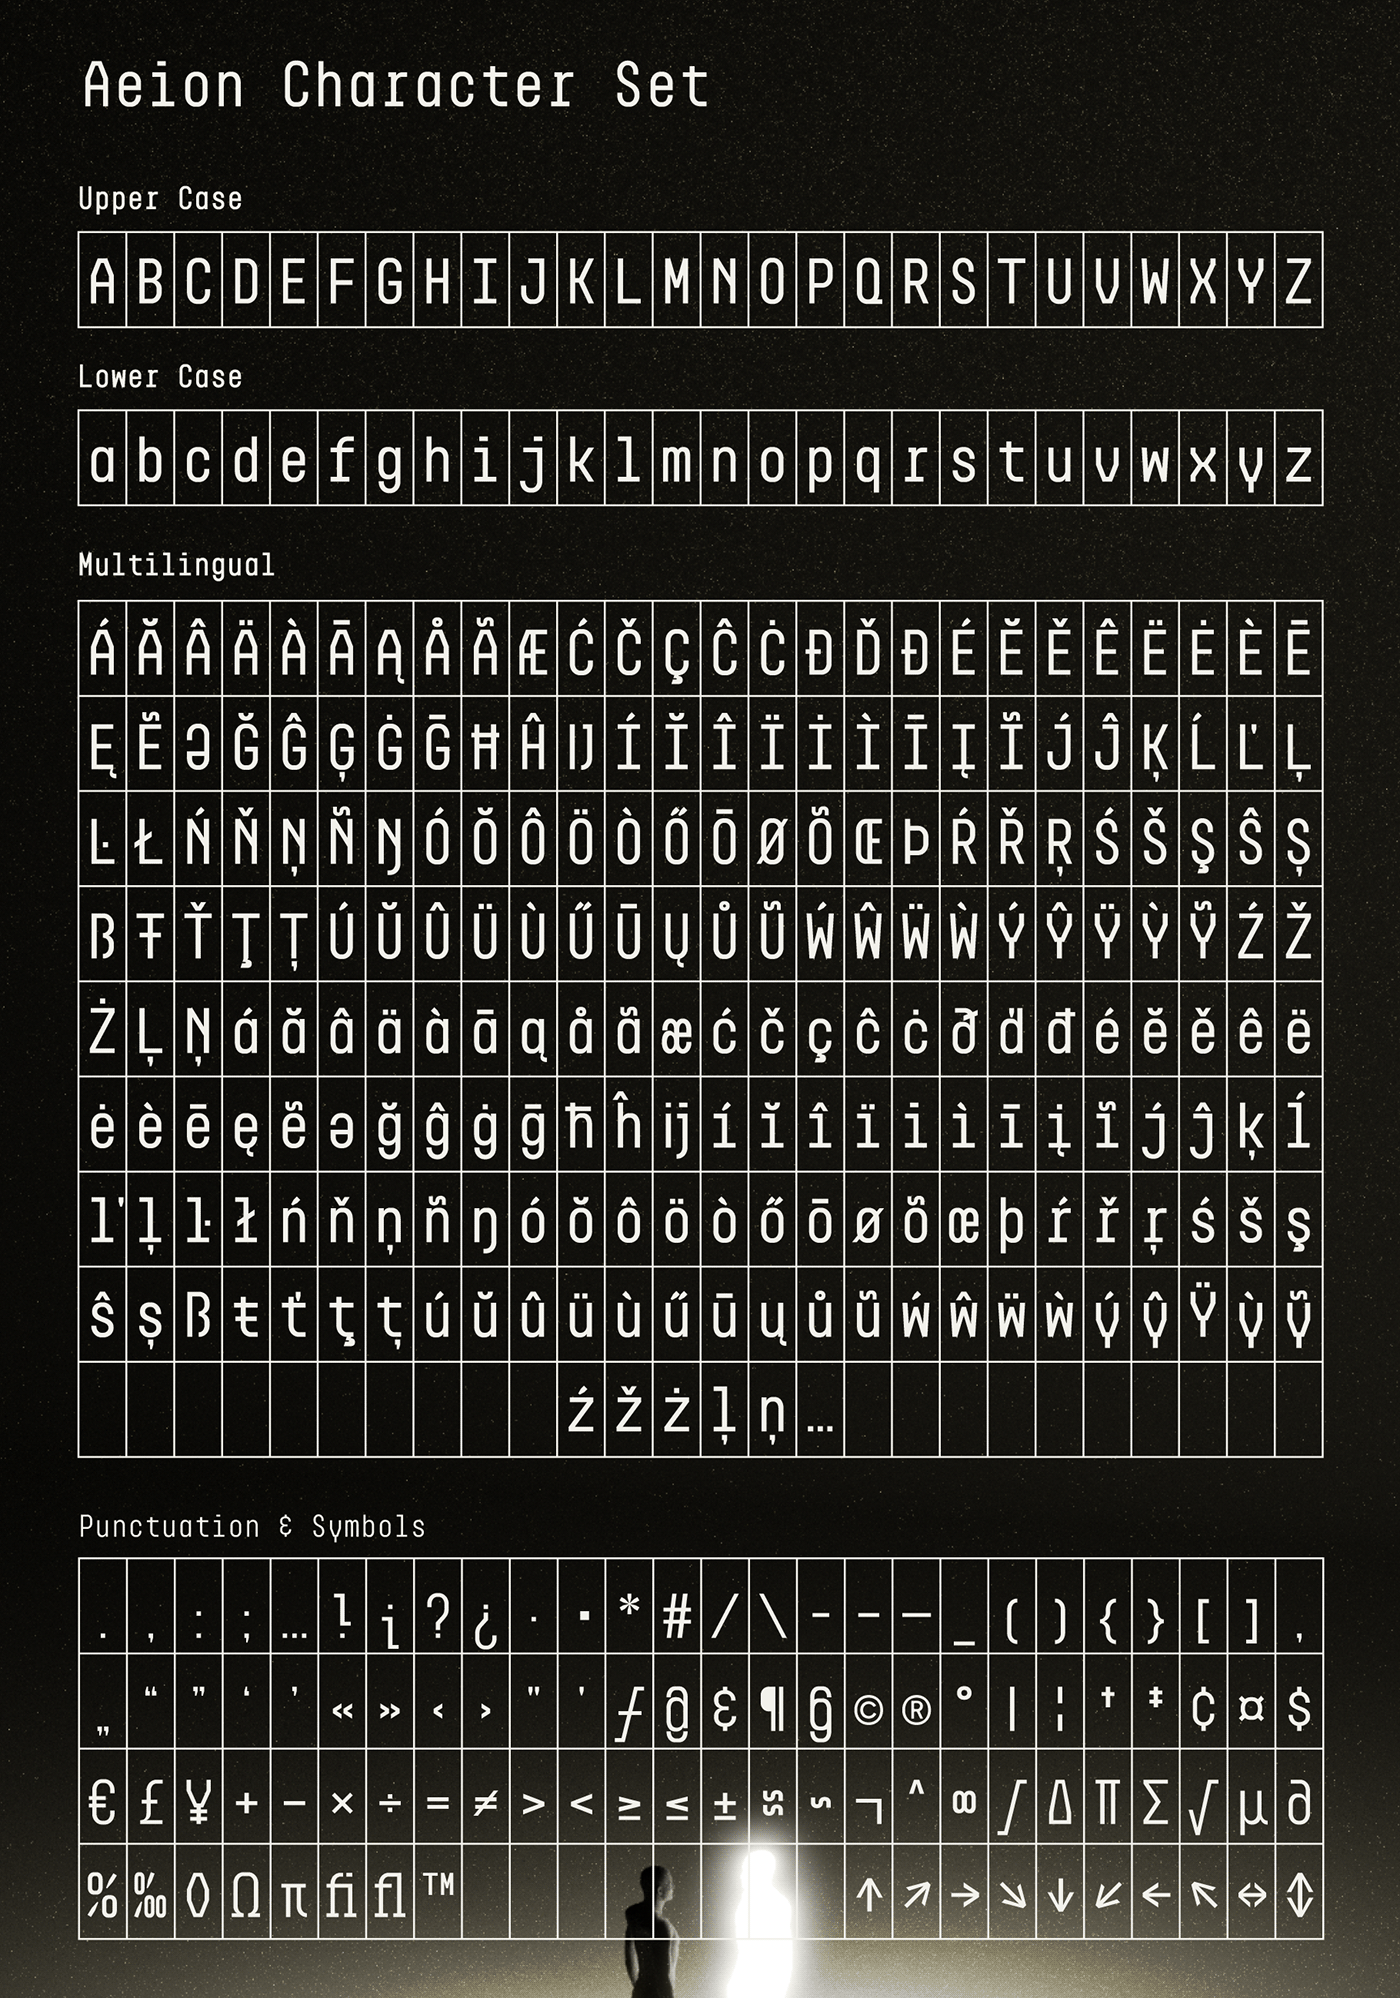 the full character set of aeion font
